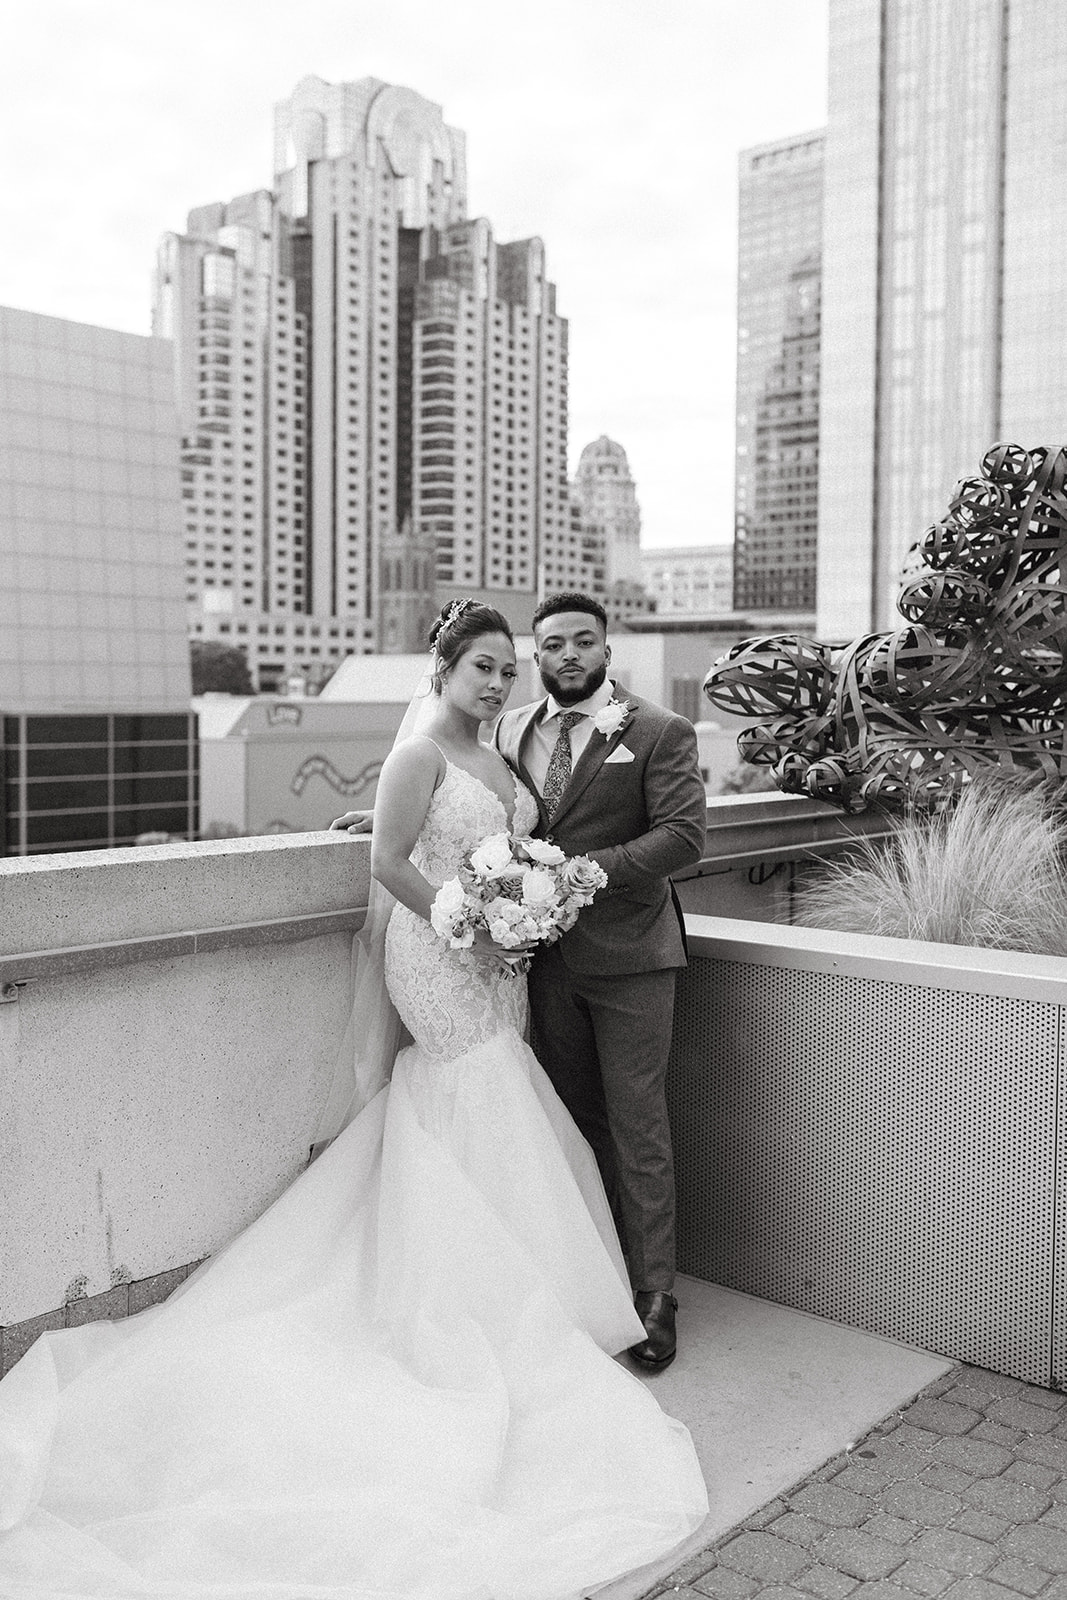 A couple who got married in Downtown San Francisco